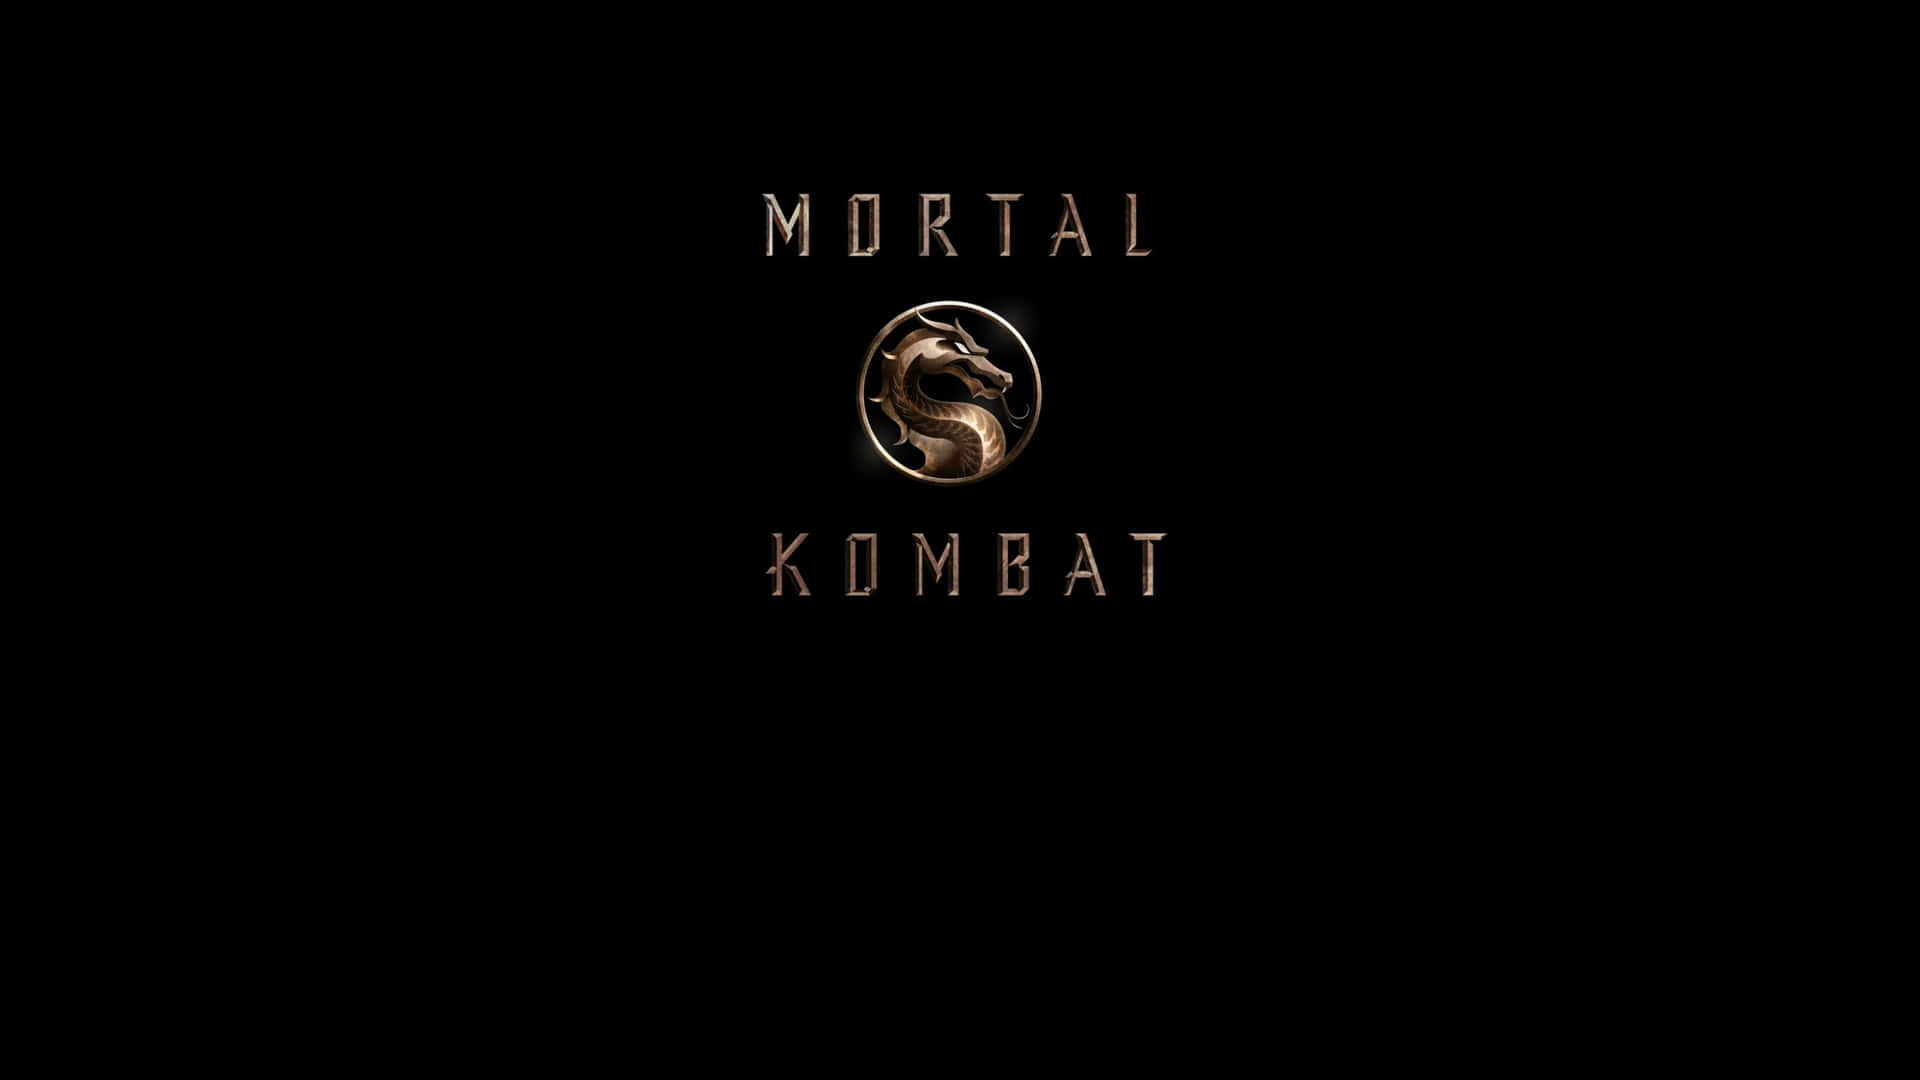 Have you chosen your fighter for Mortal Kombat 2021? Wallpaper